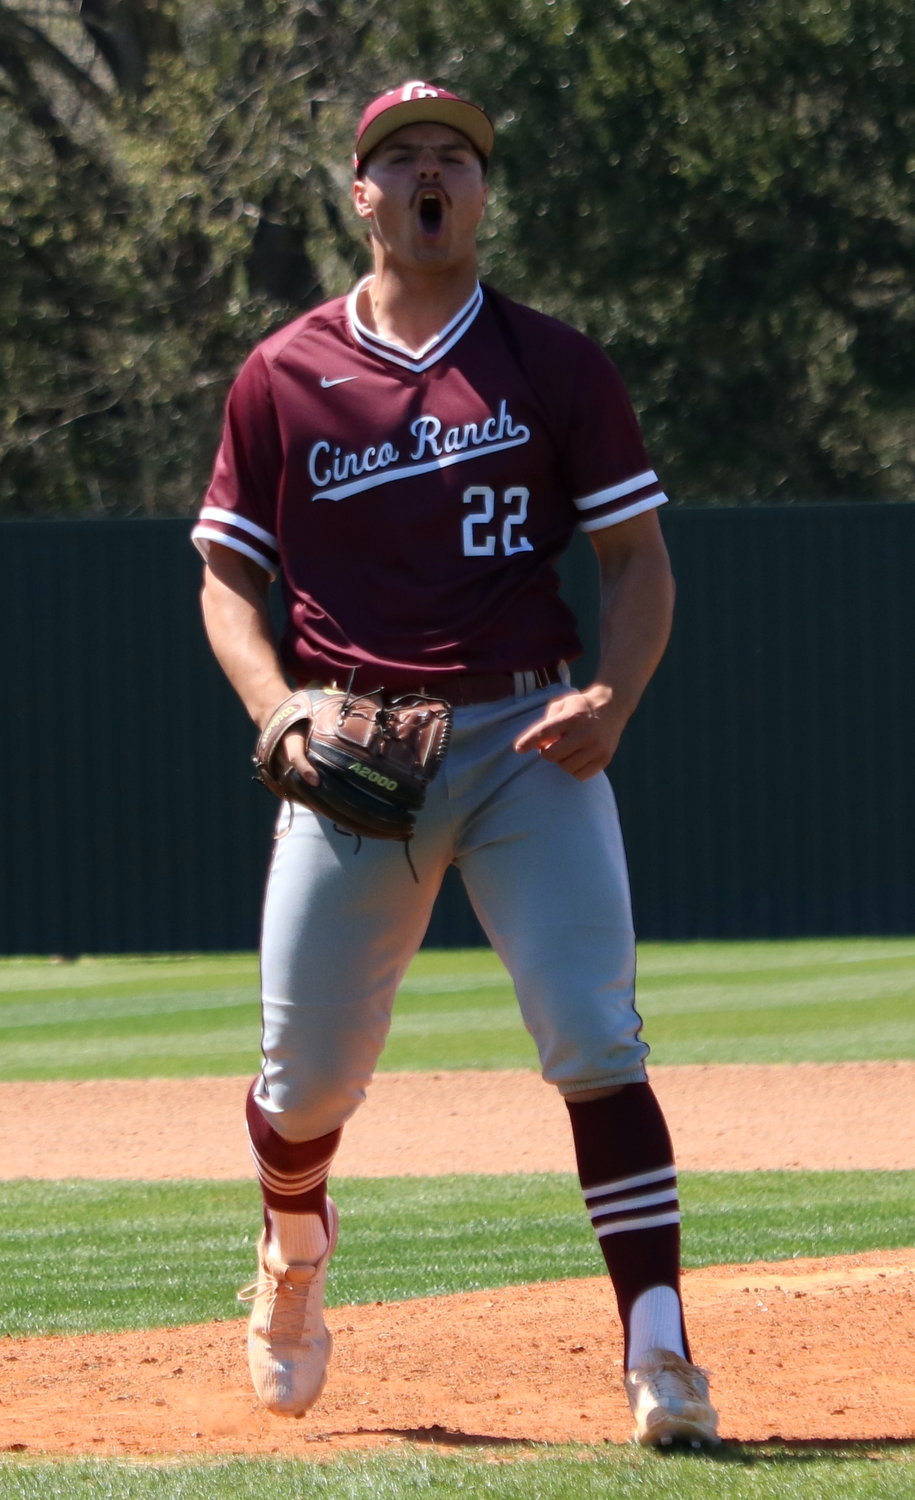 Blake Hansen celebrates after getting out of a jam during a game between Katy and Cinco Ranch at the Katy baseball field.